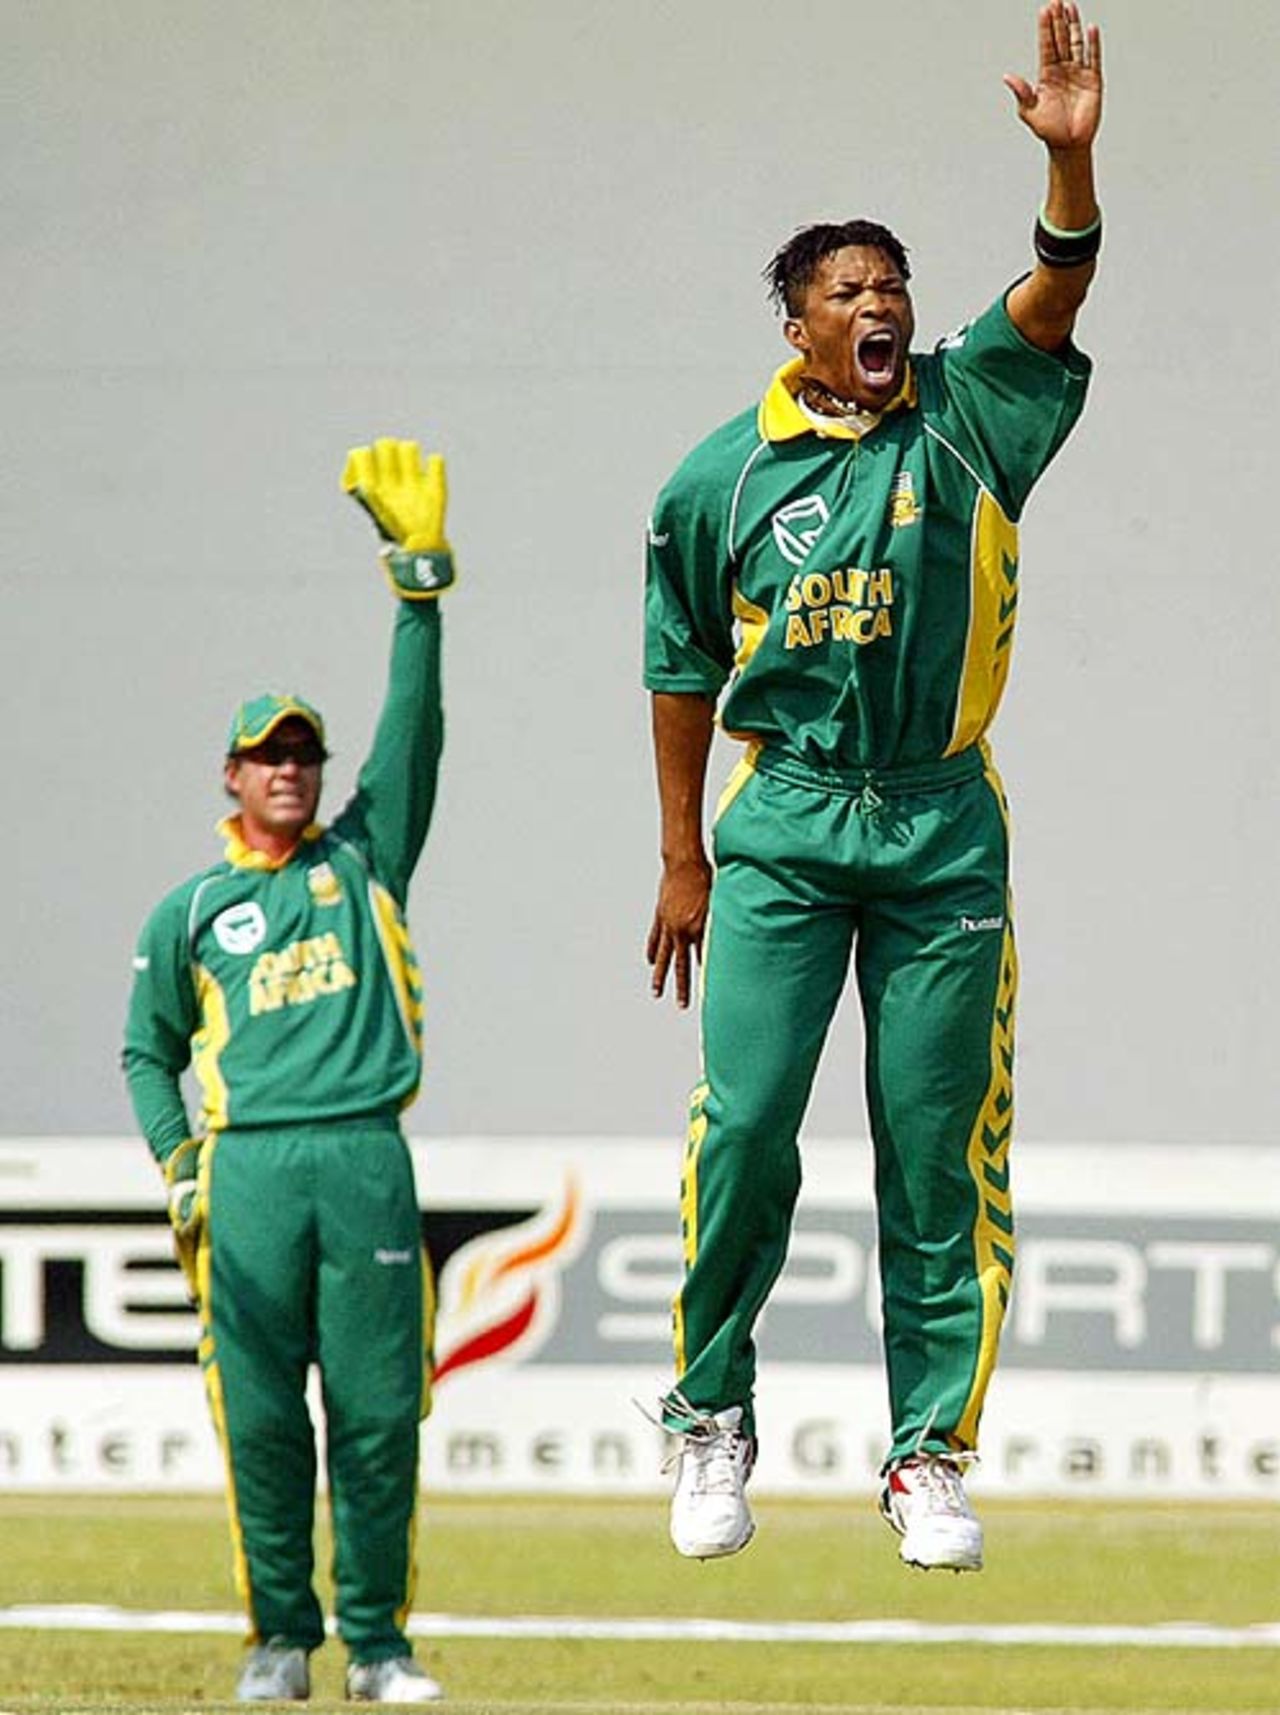 Makhaya Ntini and AB De Villiers successfully appeal for a caught behind after Vusi Sibanda got a faint edge, Zimbabwe v South Africa, 2nd ODI, Harare, August 25, 2007